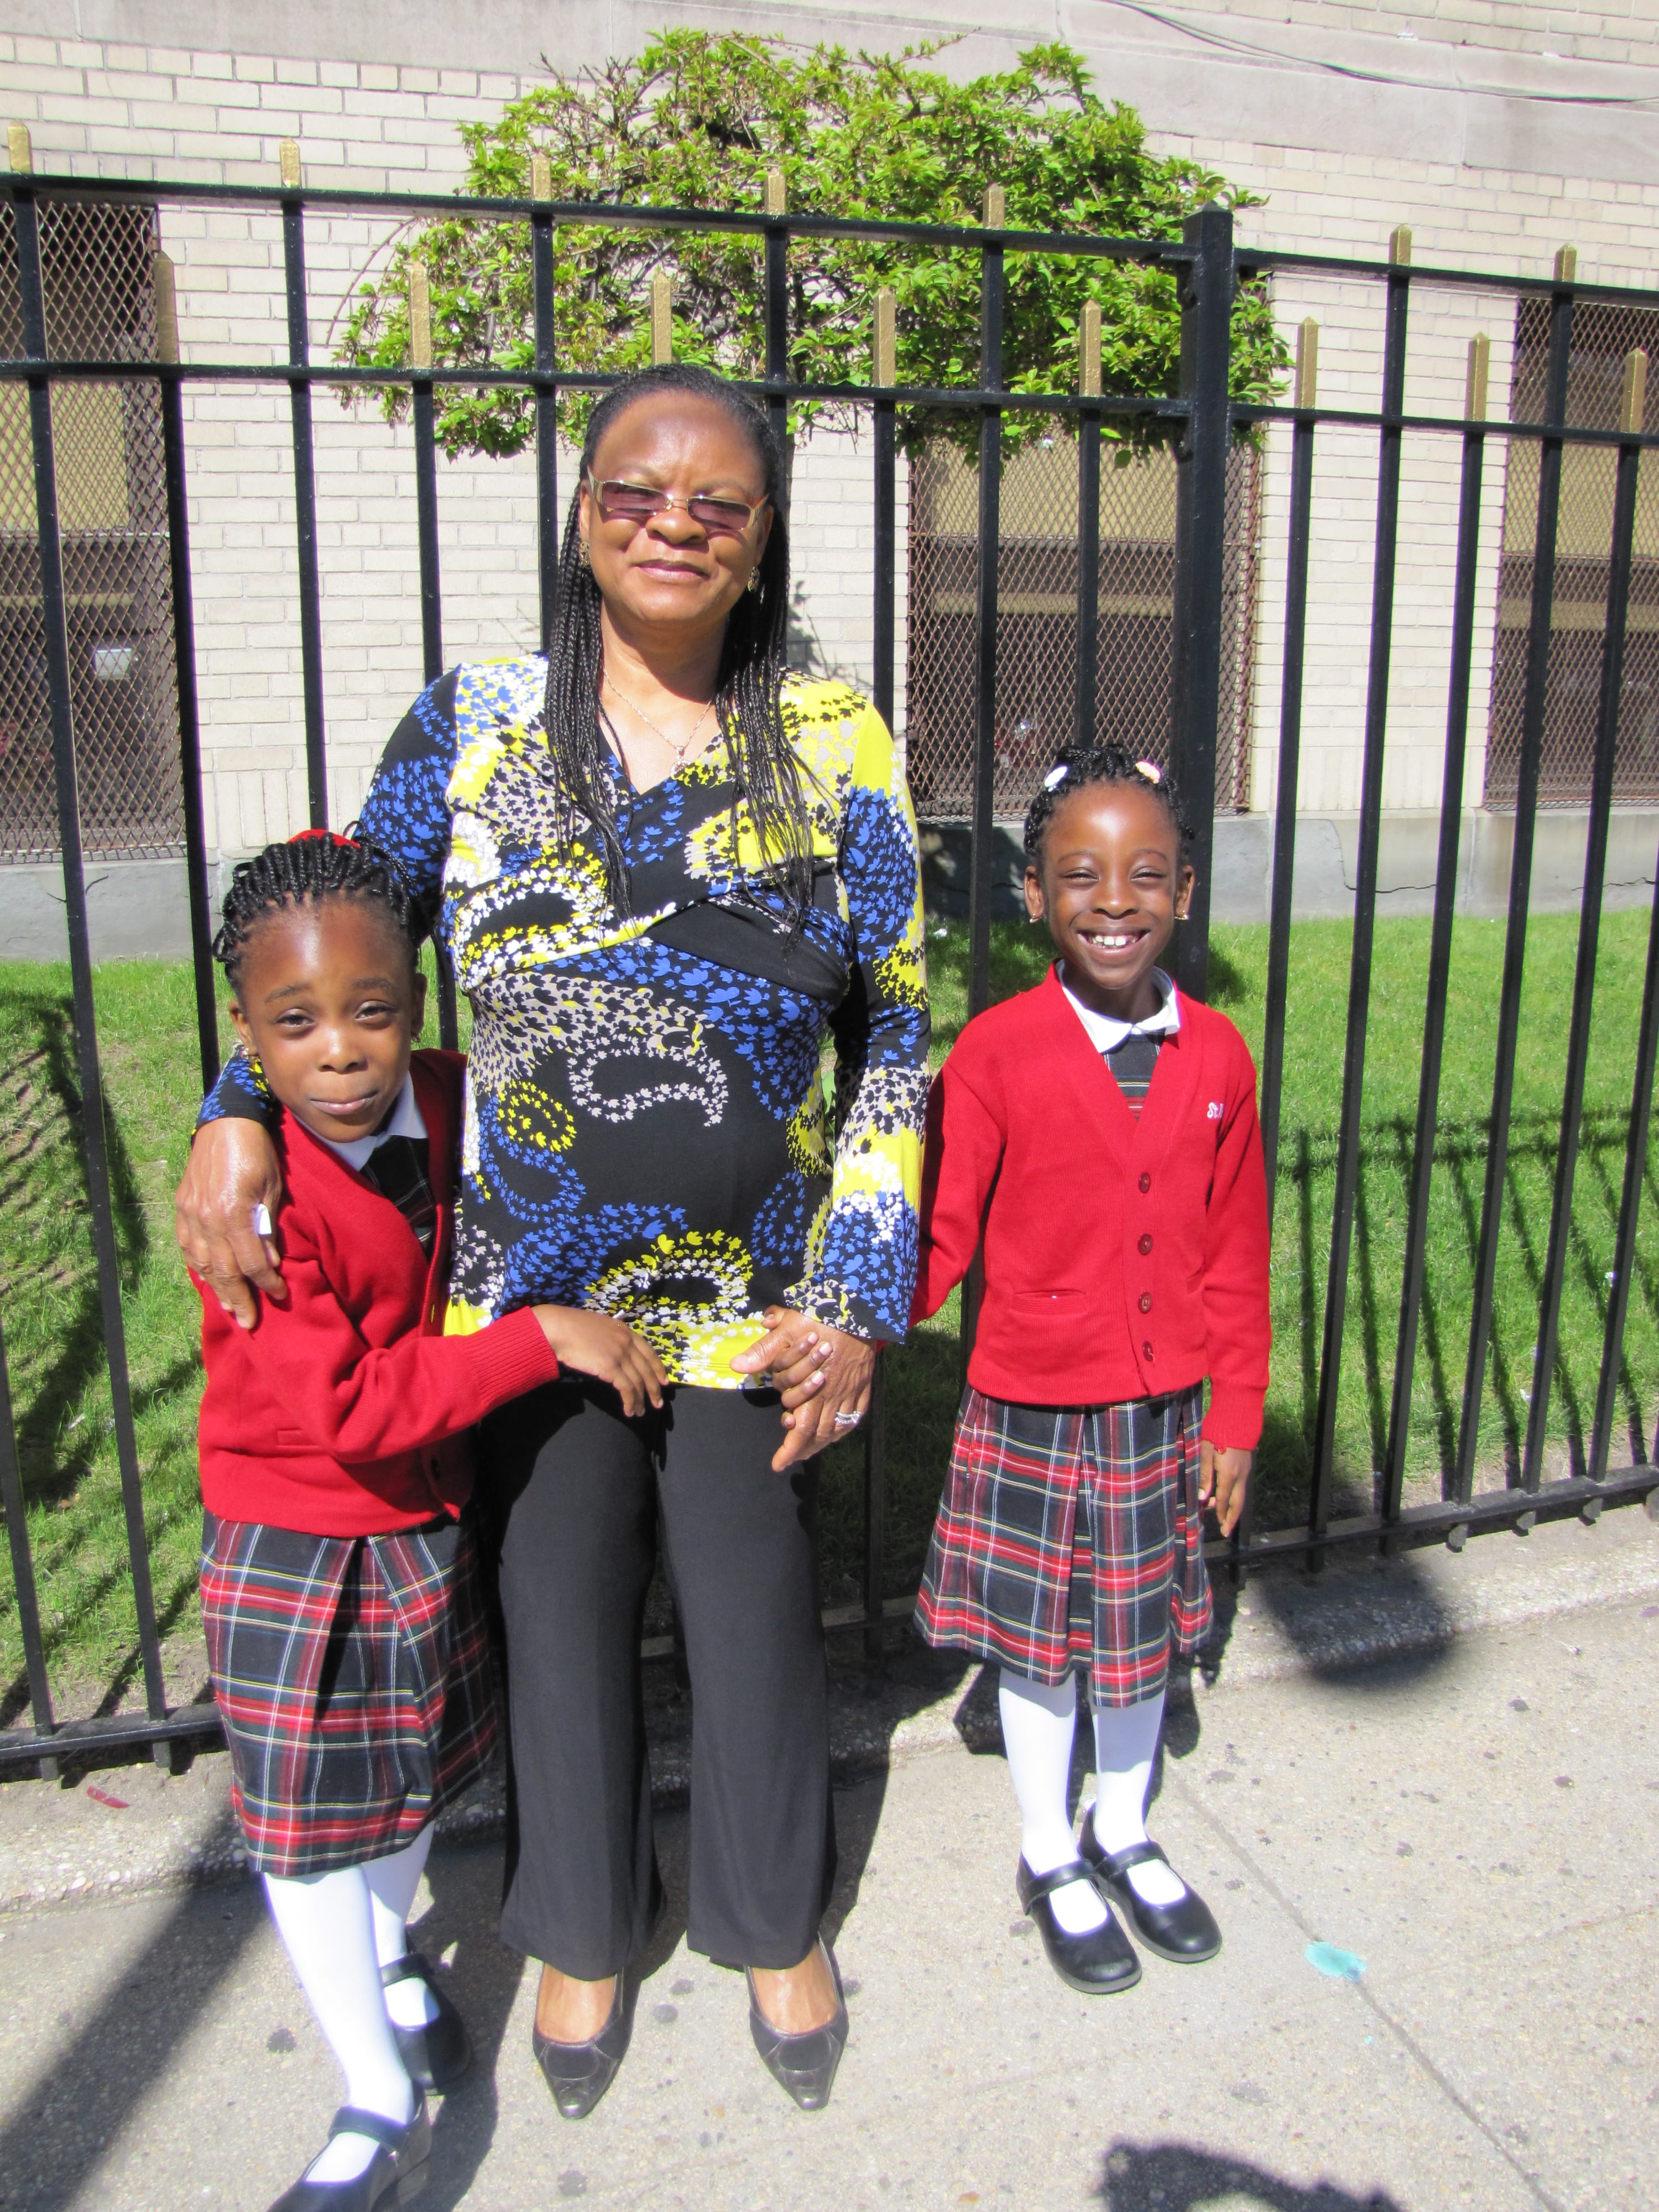 Mrs. Obazee and her twin daughters outside St. Mark School in Brooklyn.